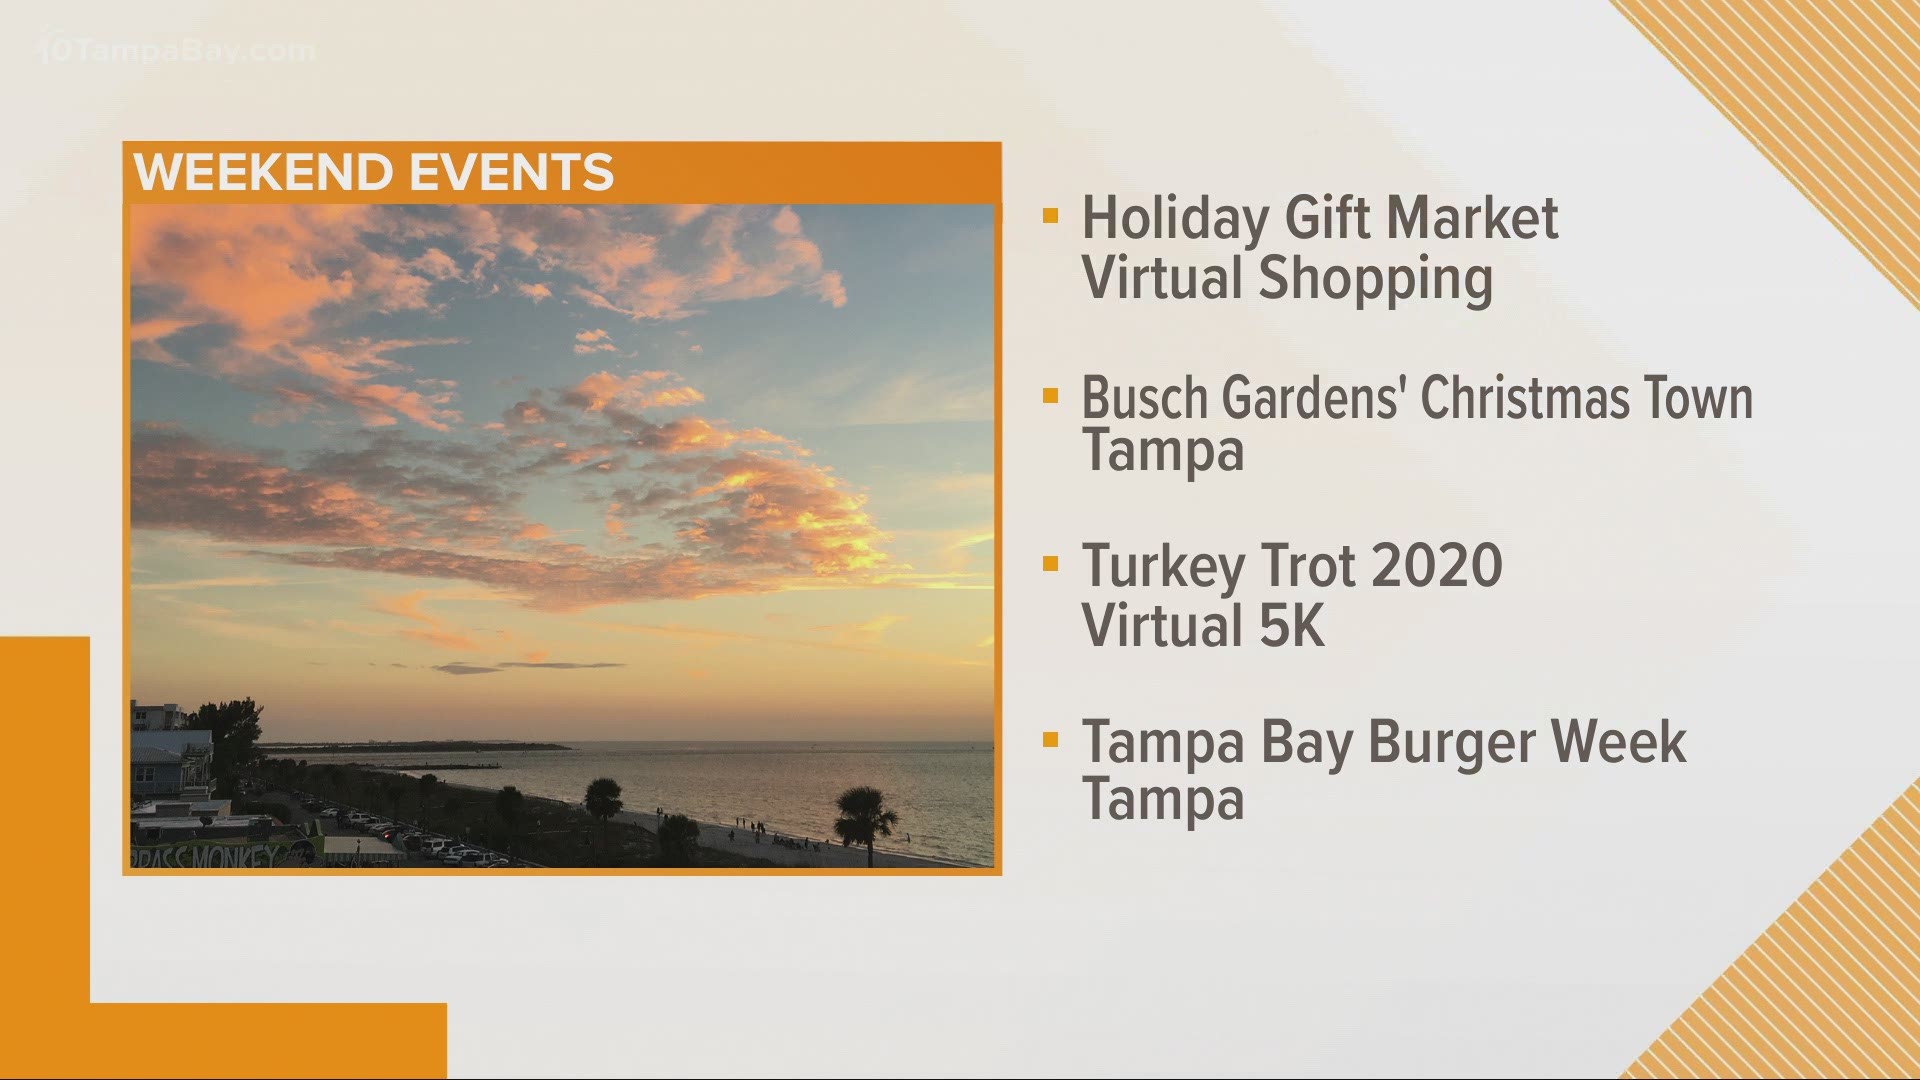 Here's what you can do this weekend in Tampa Bay.